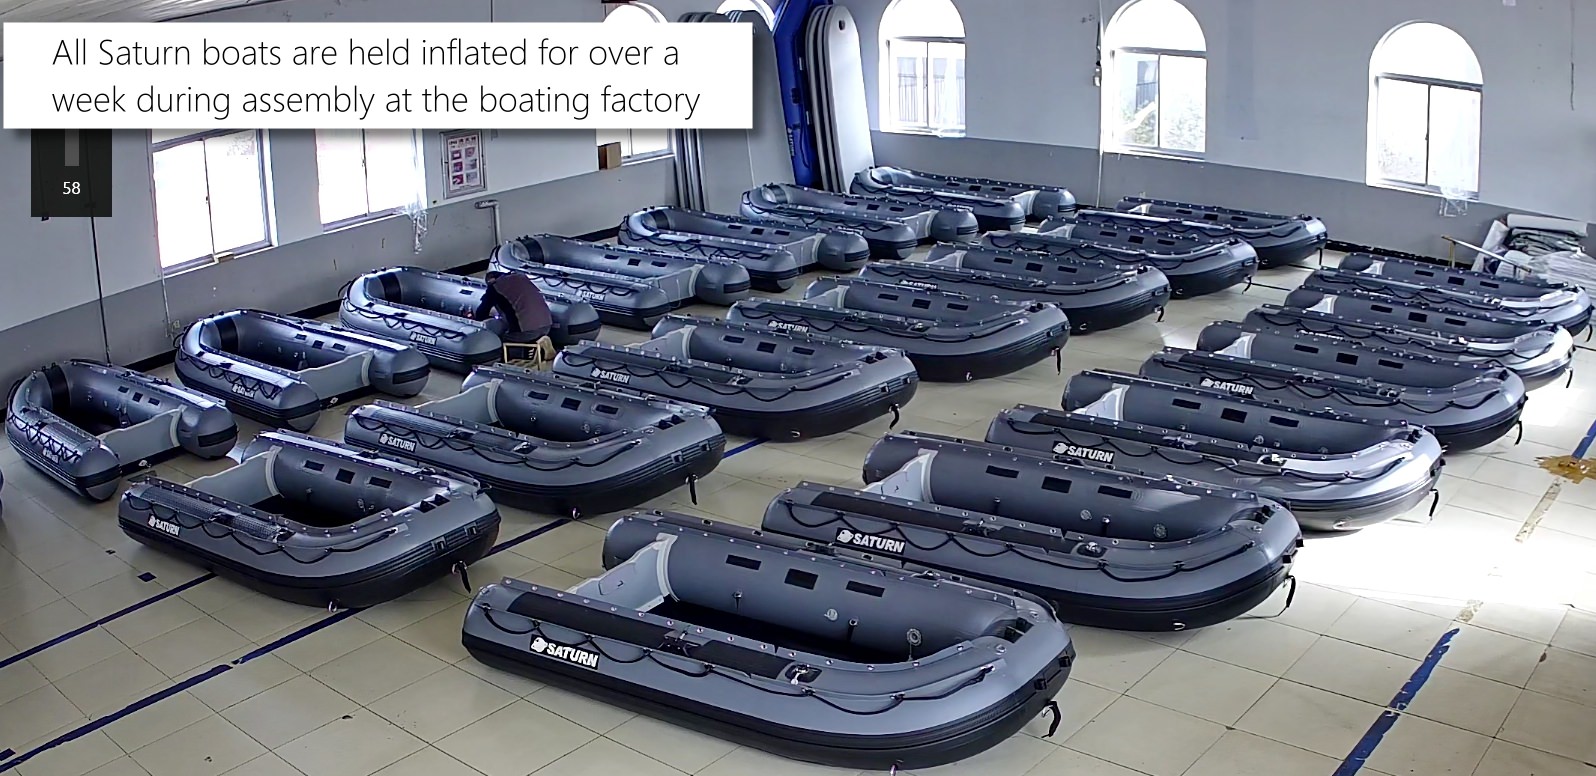 Saturn inflatable boats at factory during assembly